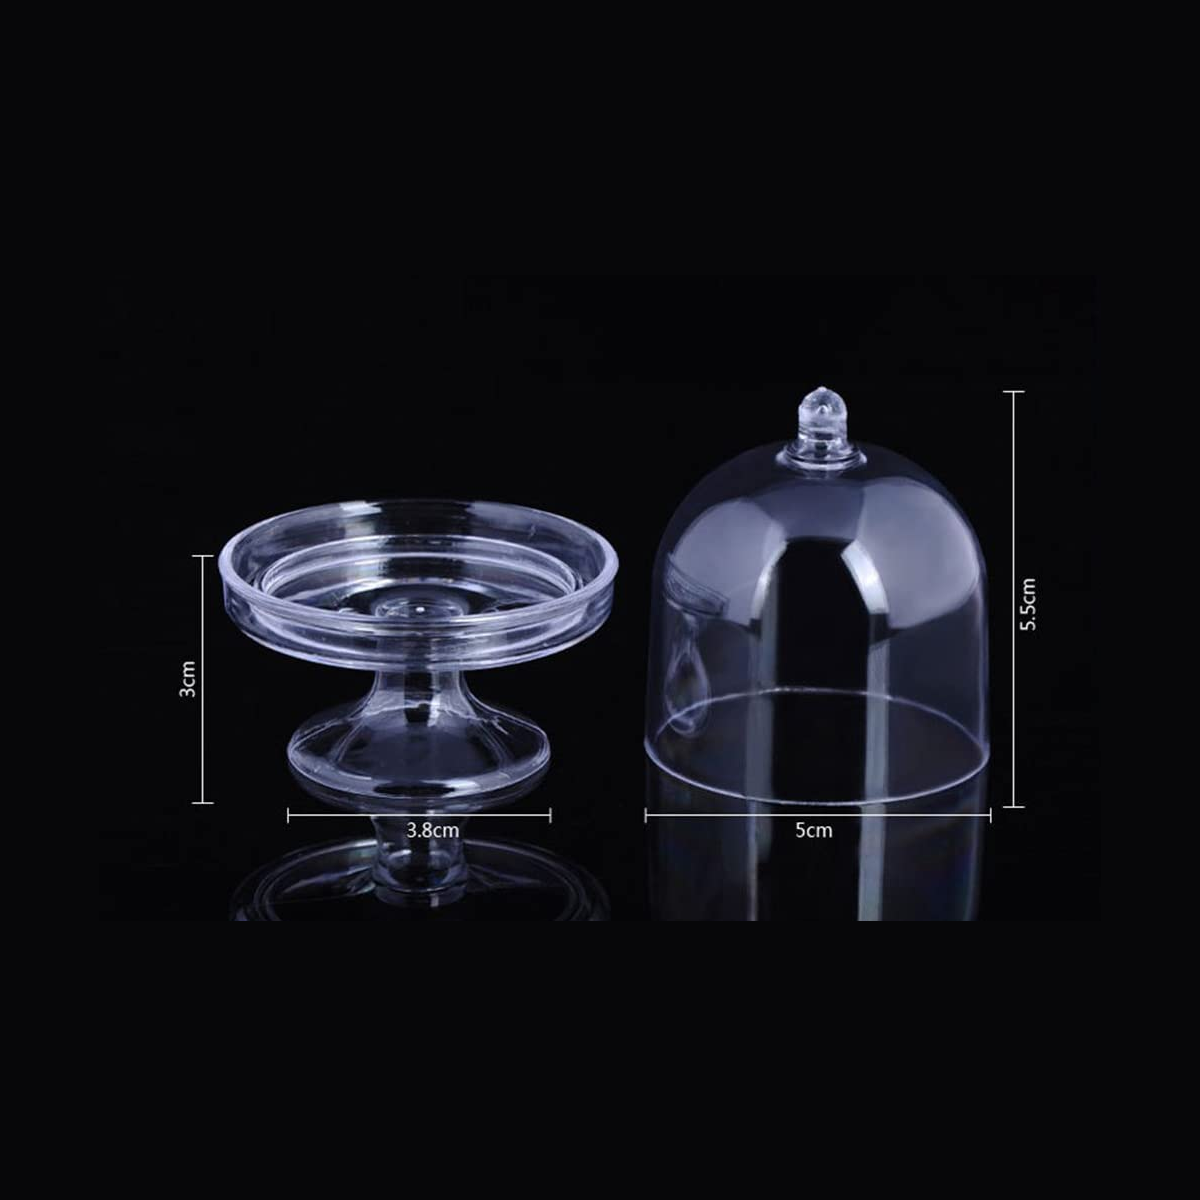 6pcs Mini Cake Stand Shape Candy Box Transparent Tray Modeling Sugar Holder Wedding Favor Boxes Party Supplies